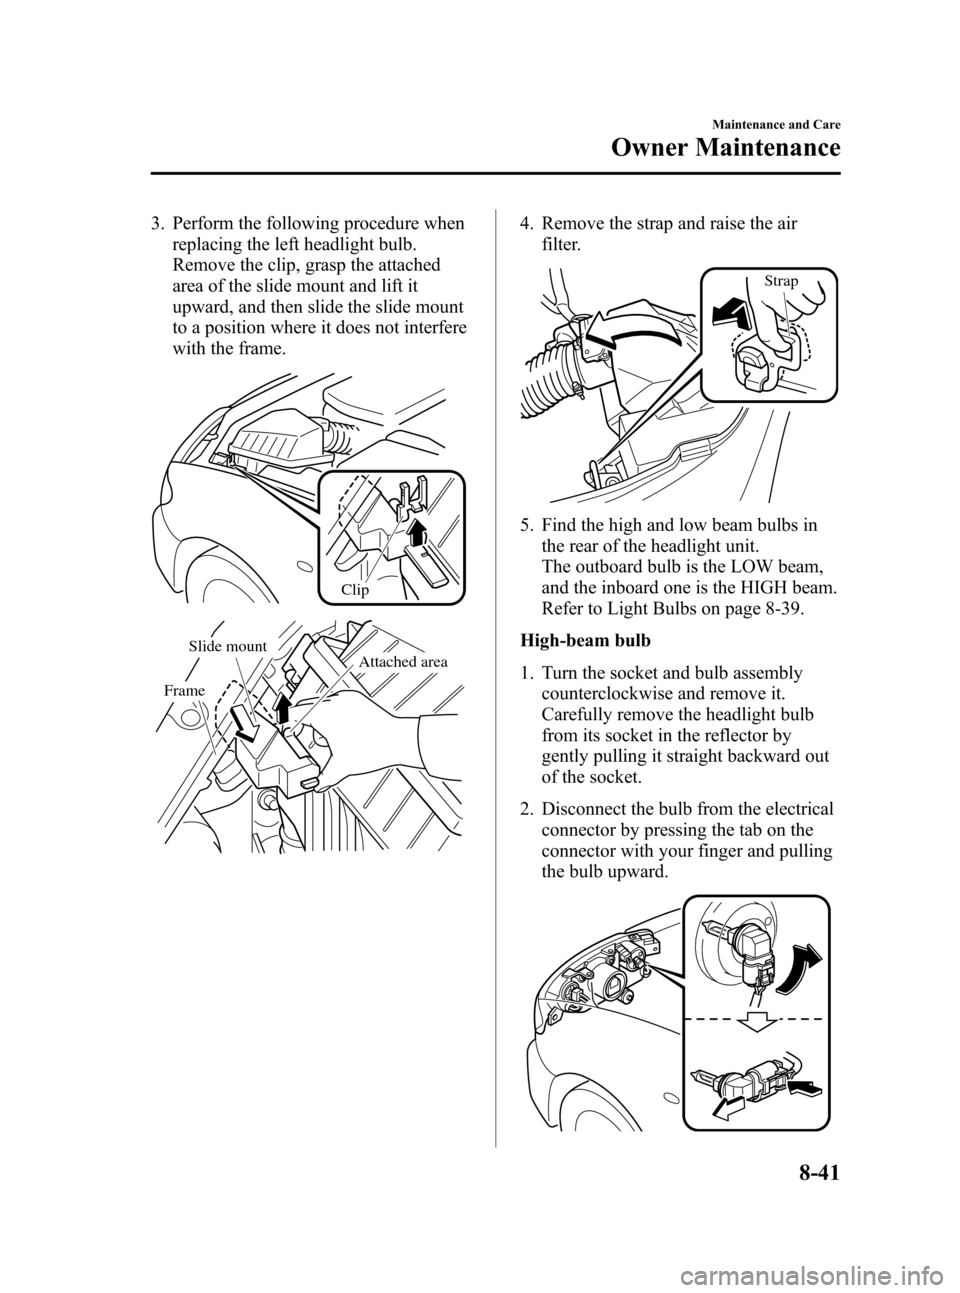 MAZDA MODEL 3 HATCHBACK 2008  Owners Manual (in English) Black plate (309,1)
3. Perform the following procedure when
replacing the left headlight bulb.
Remove the clip, grasp the attached
area of the slide mount and lift it
upward, and then slide the slide 